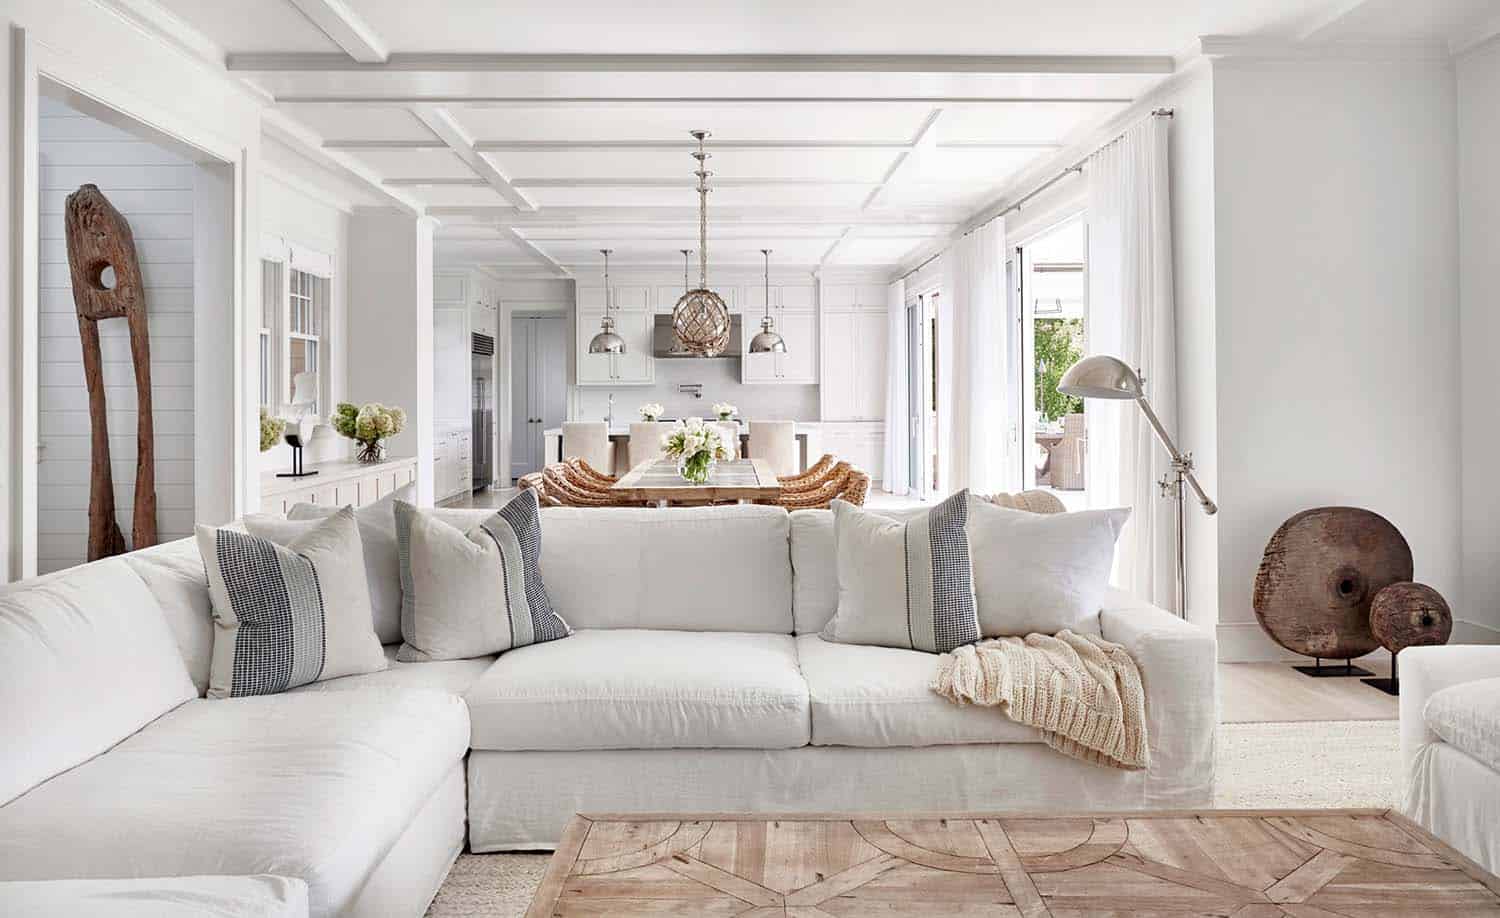 Captivating beach house in Amagansett with stylish details